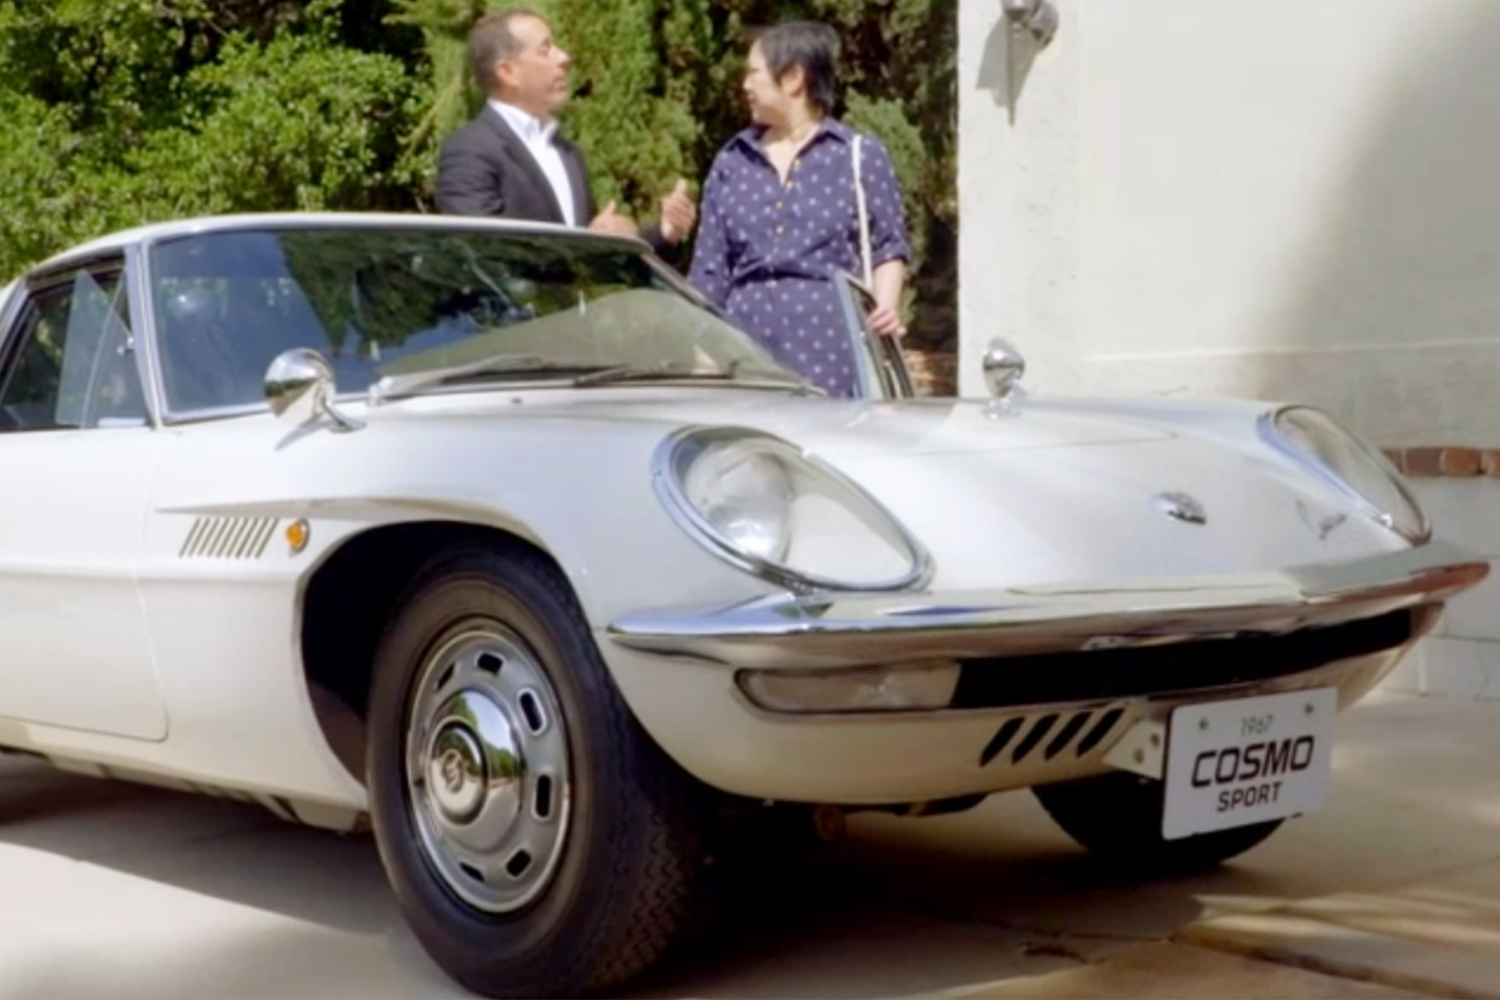 Comedians in Cars Getting Coffee Margaret Cho 1967 Mazda Cosmo Sport